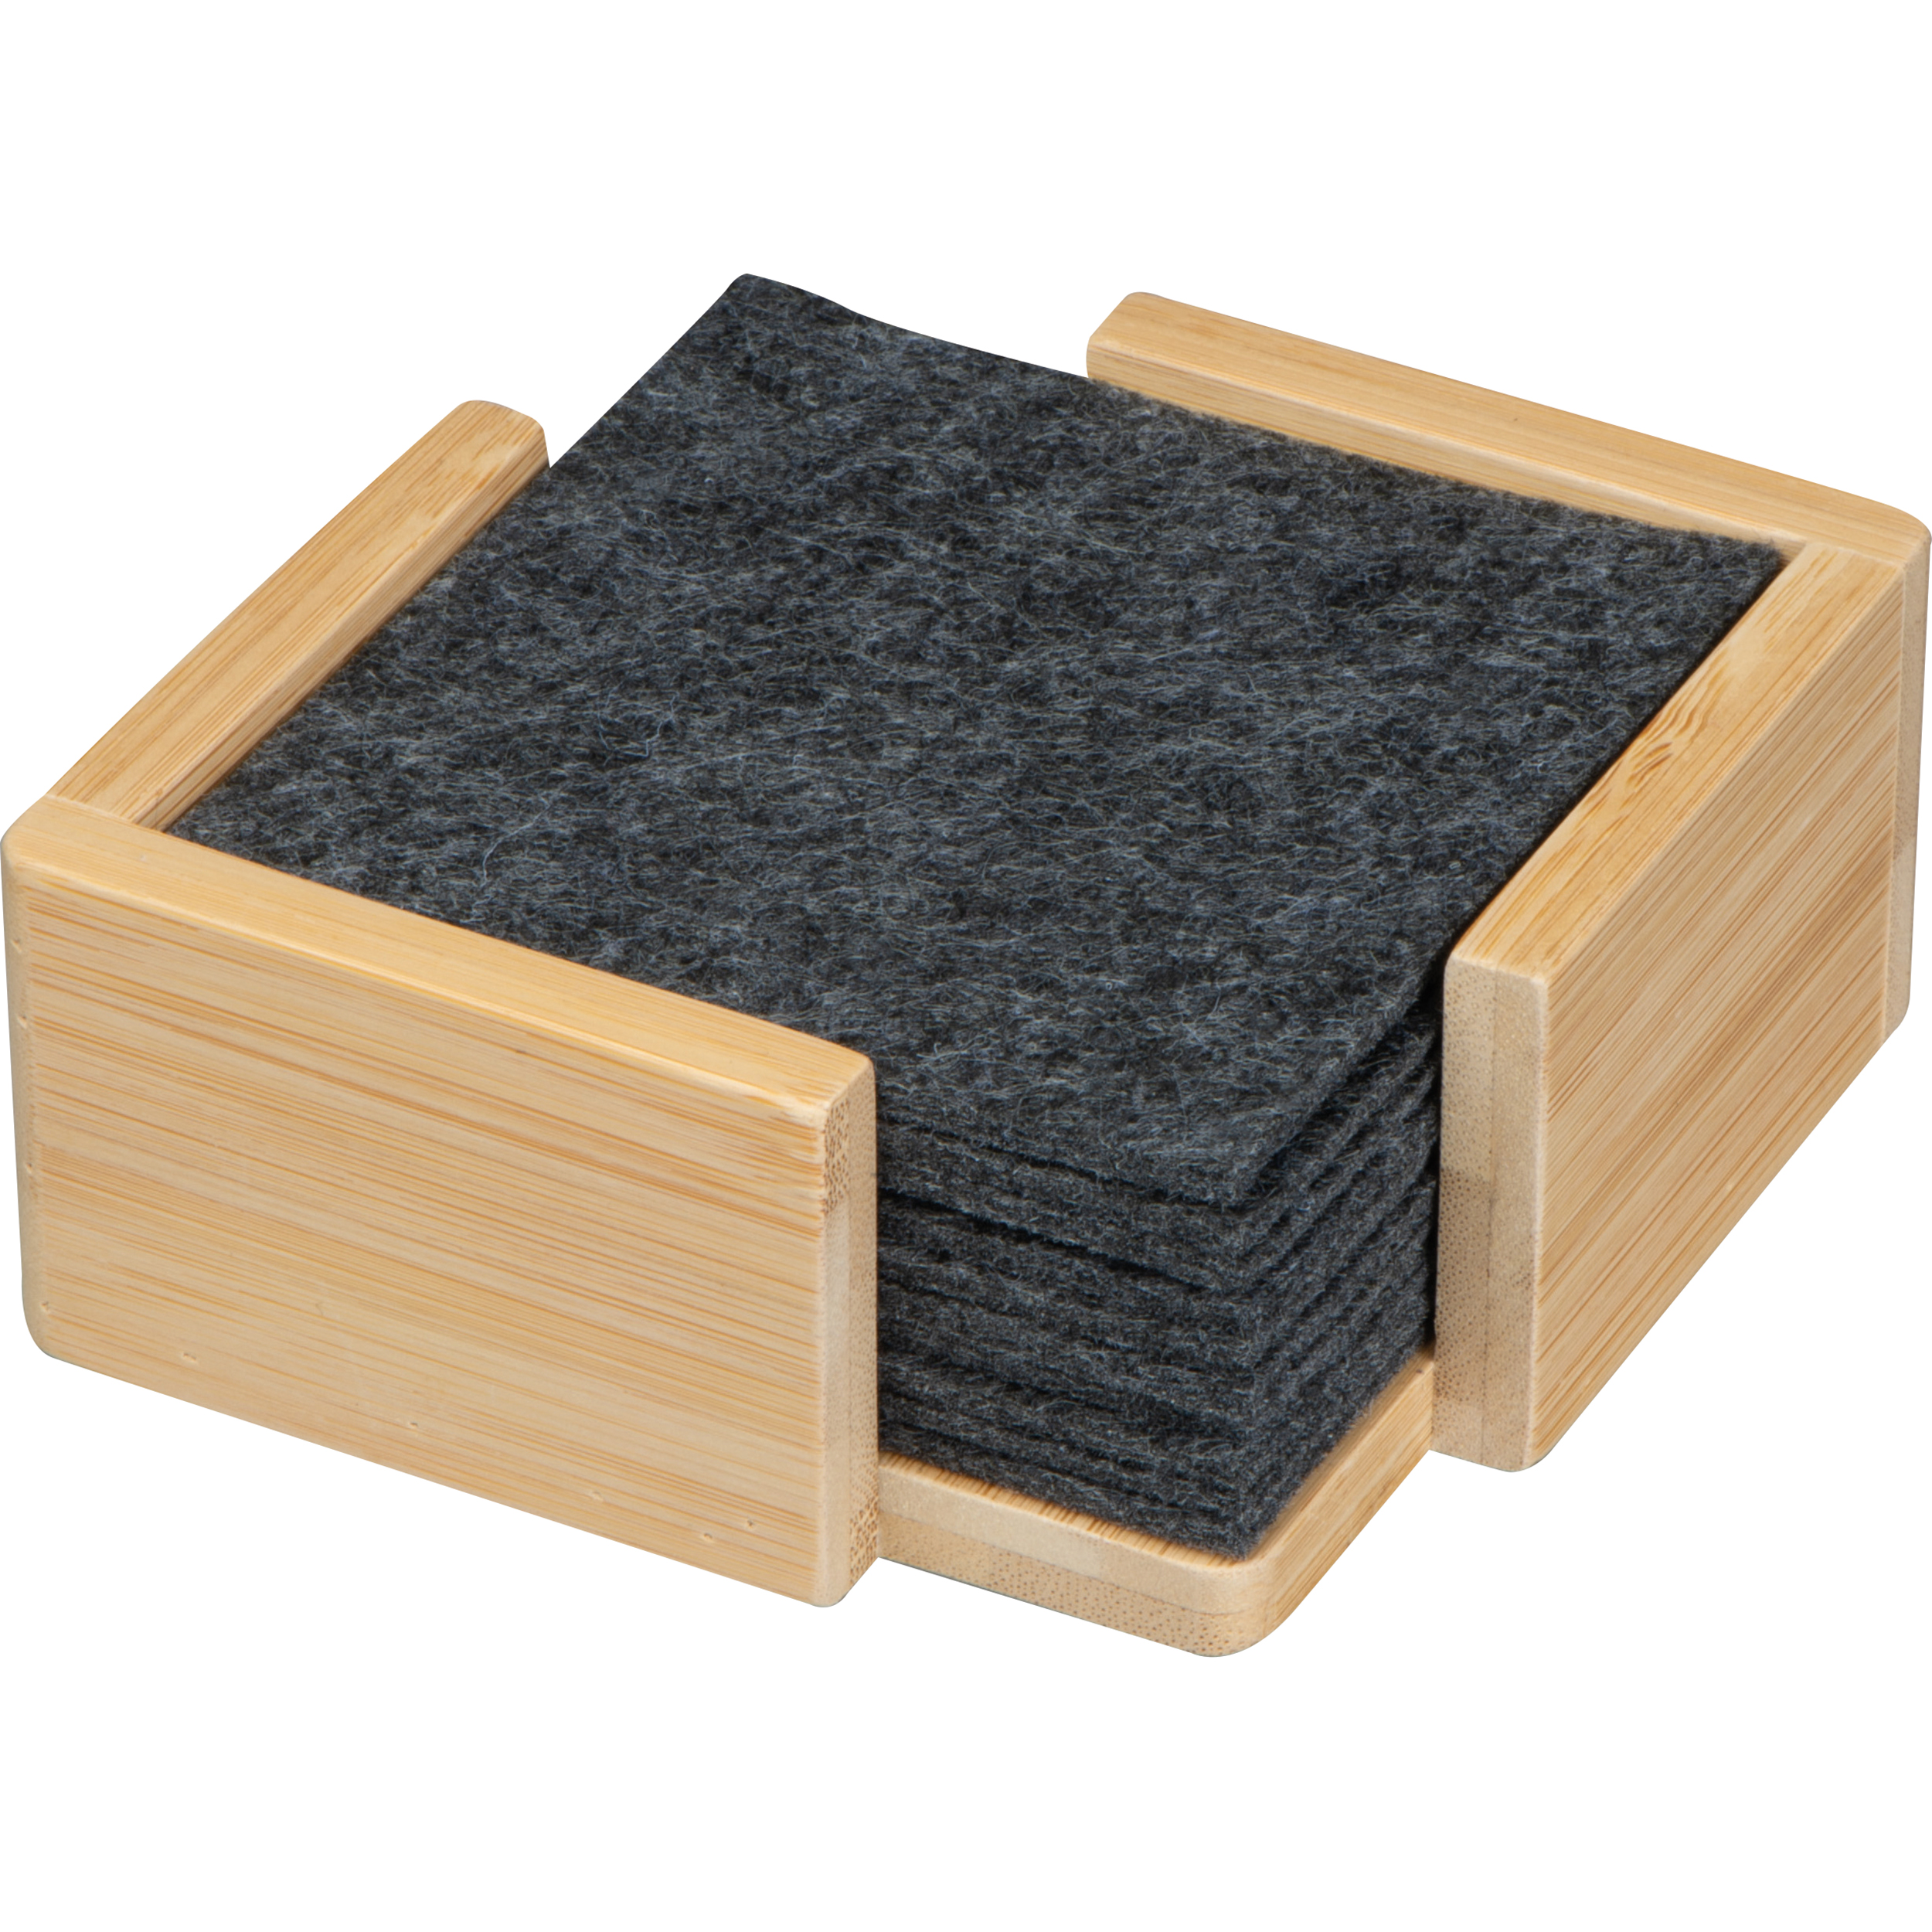 10 felt coasters in bamboo stand